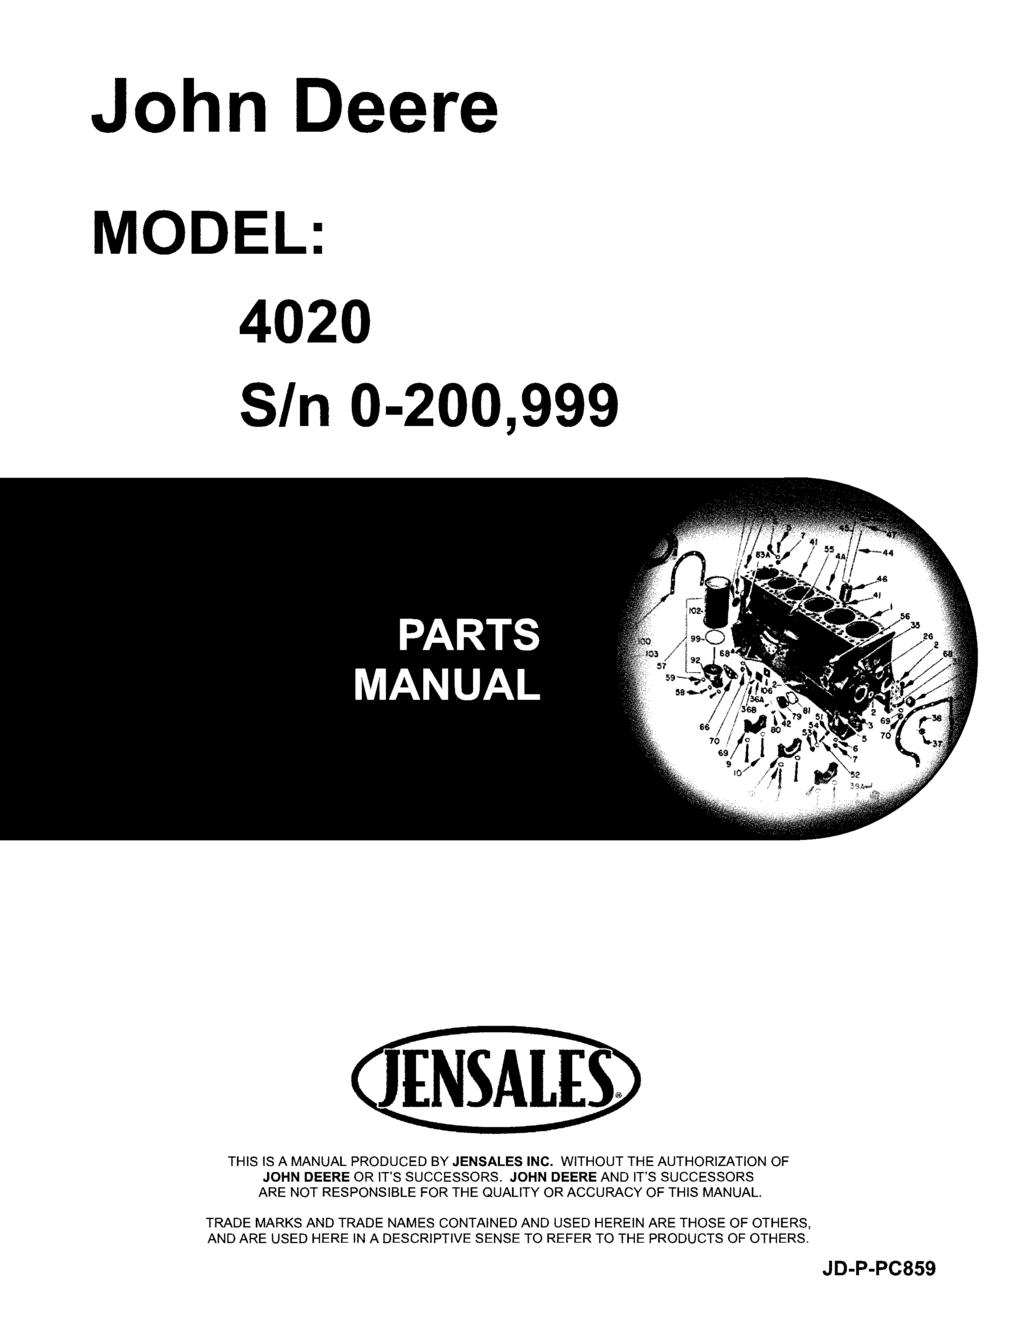 John Deere MODEL: 400 SIn 0-00,999 THIS IS A MANUAL PRODUCED BY JENSALES INC. WITHOUT THE AUTHORIZATION OF JOHN DEERE OR IT'S SUCCESSORS.